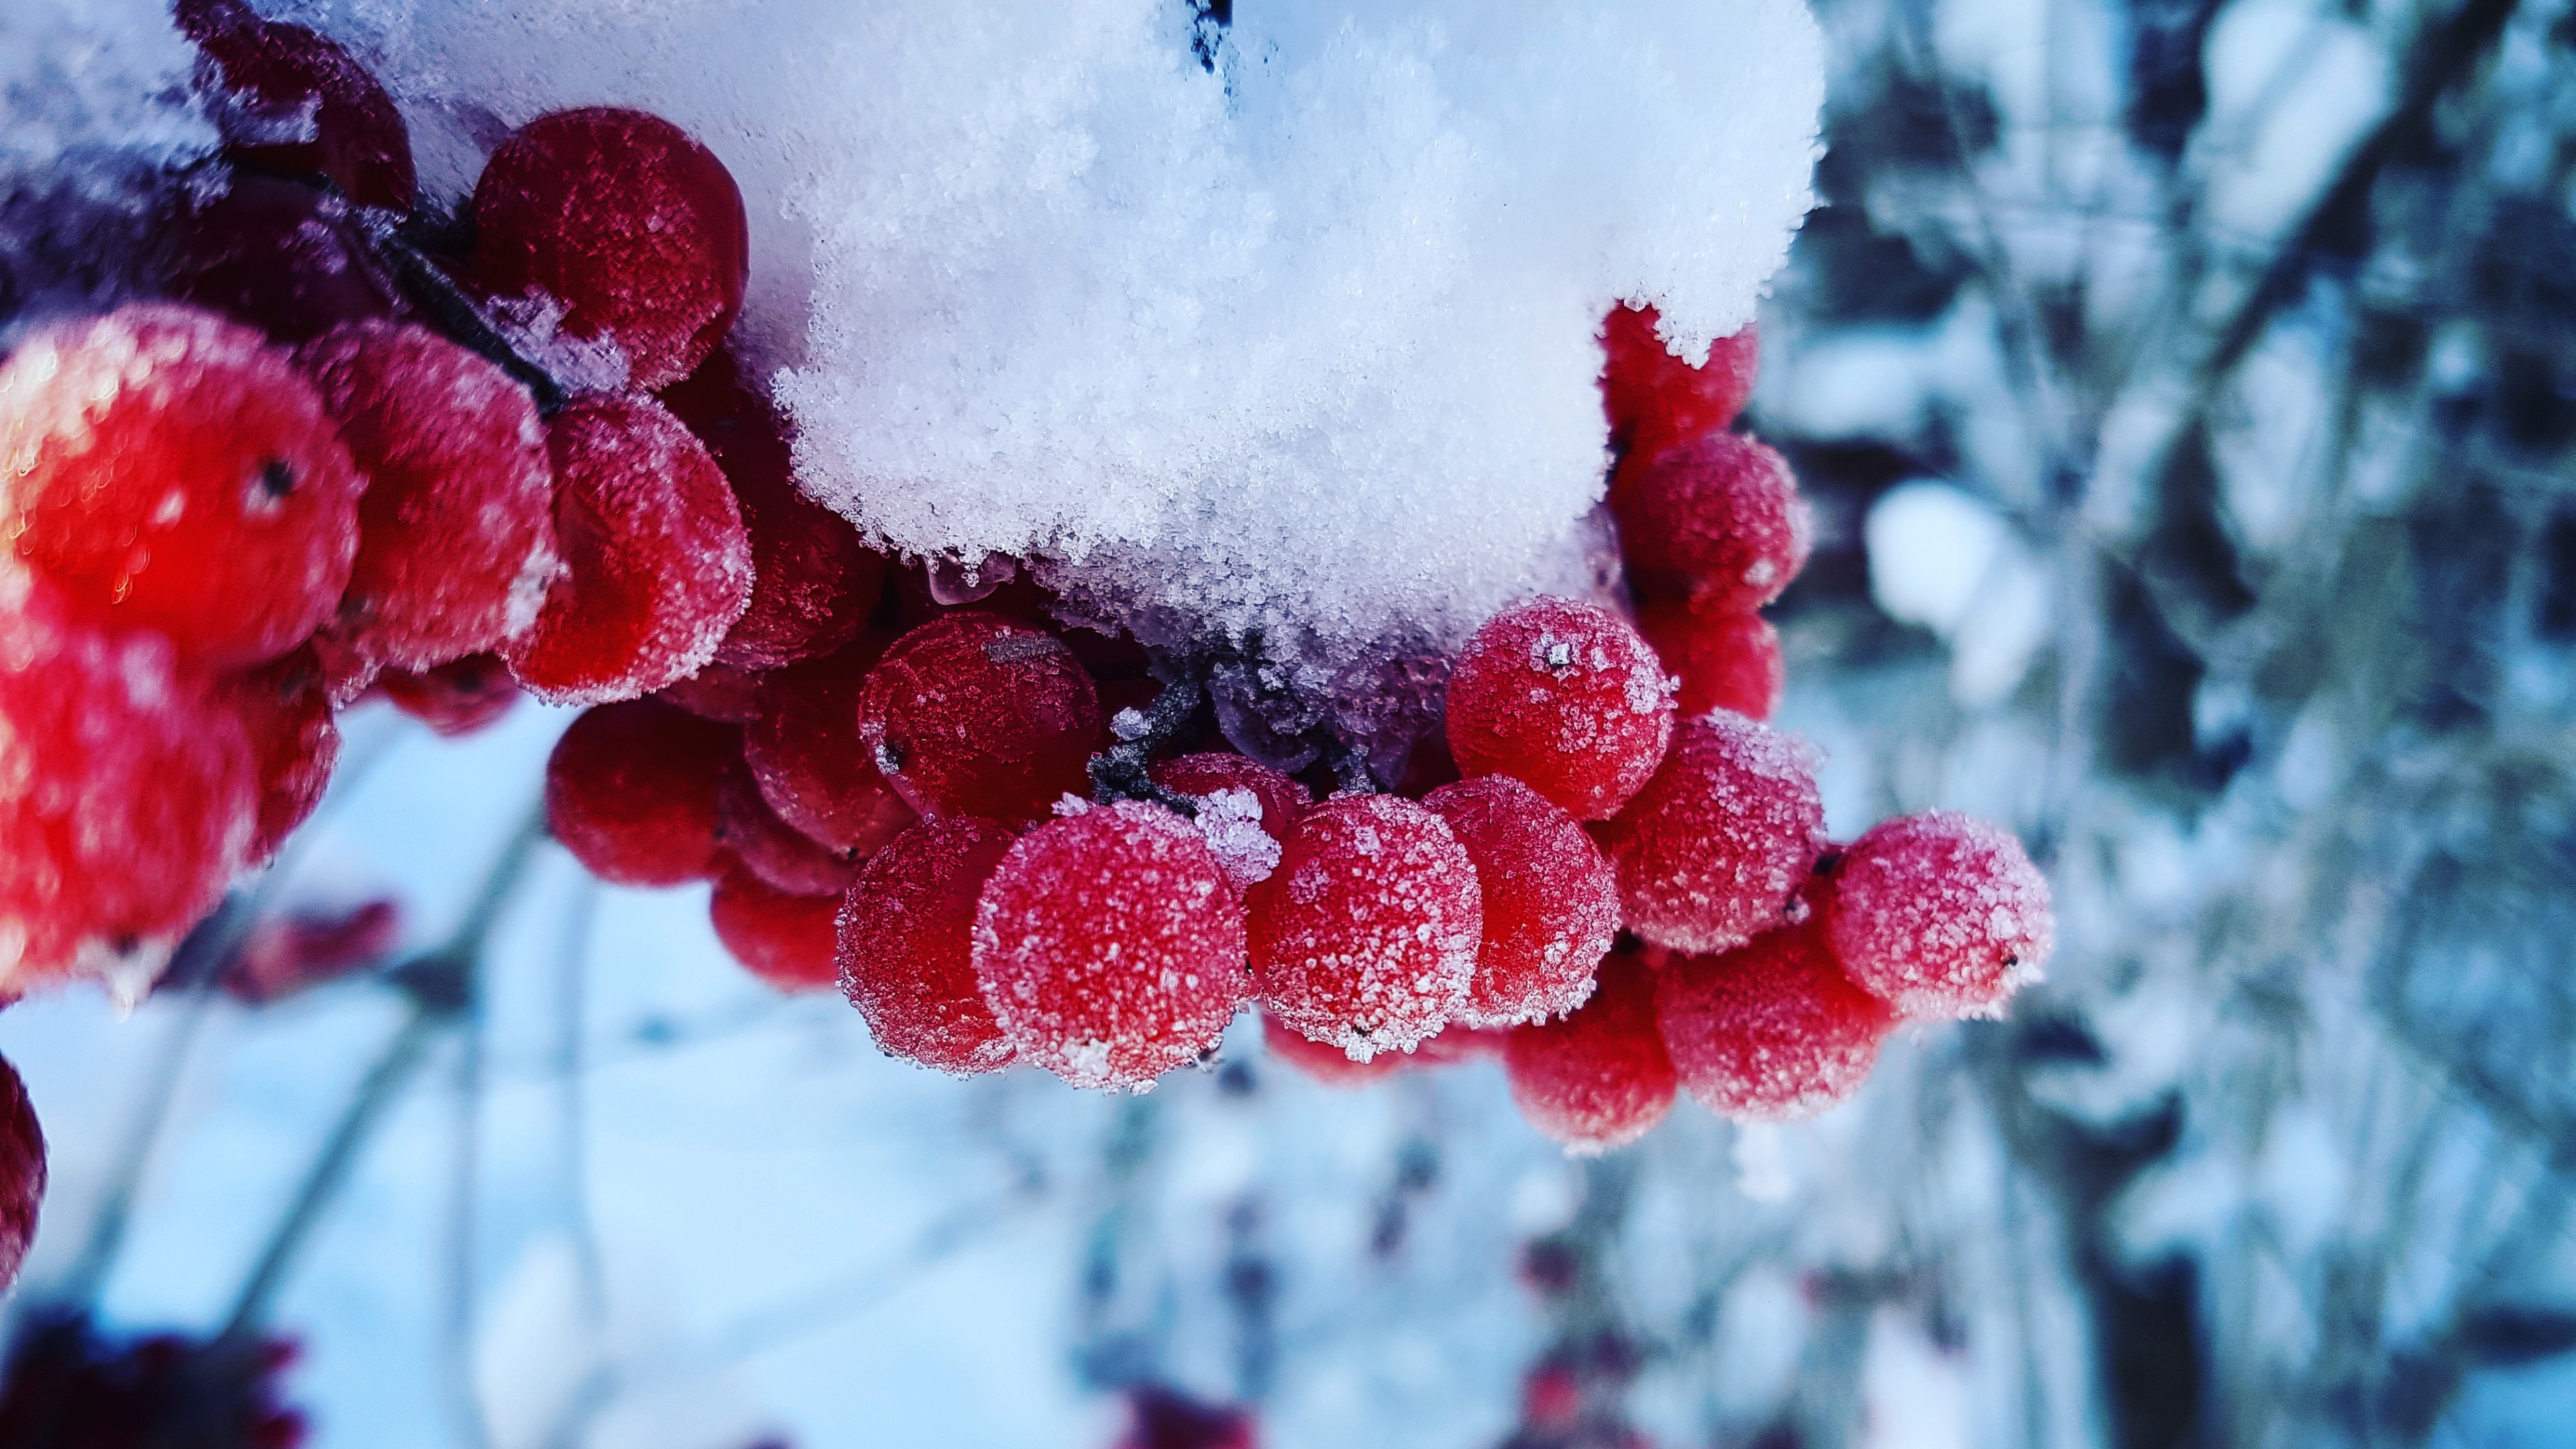 Red Round Fruits Covered With Snow. Wallpaper in 3840x2160 Resolution